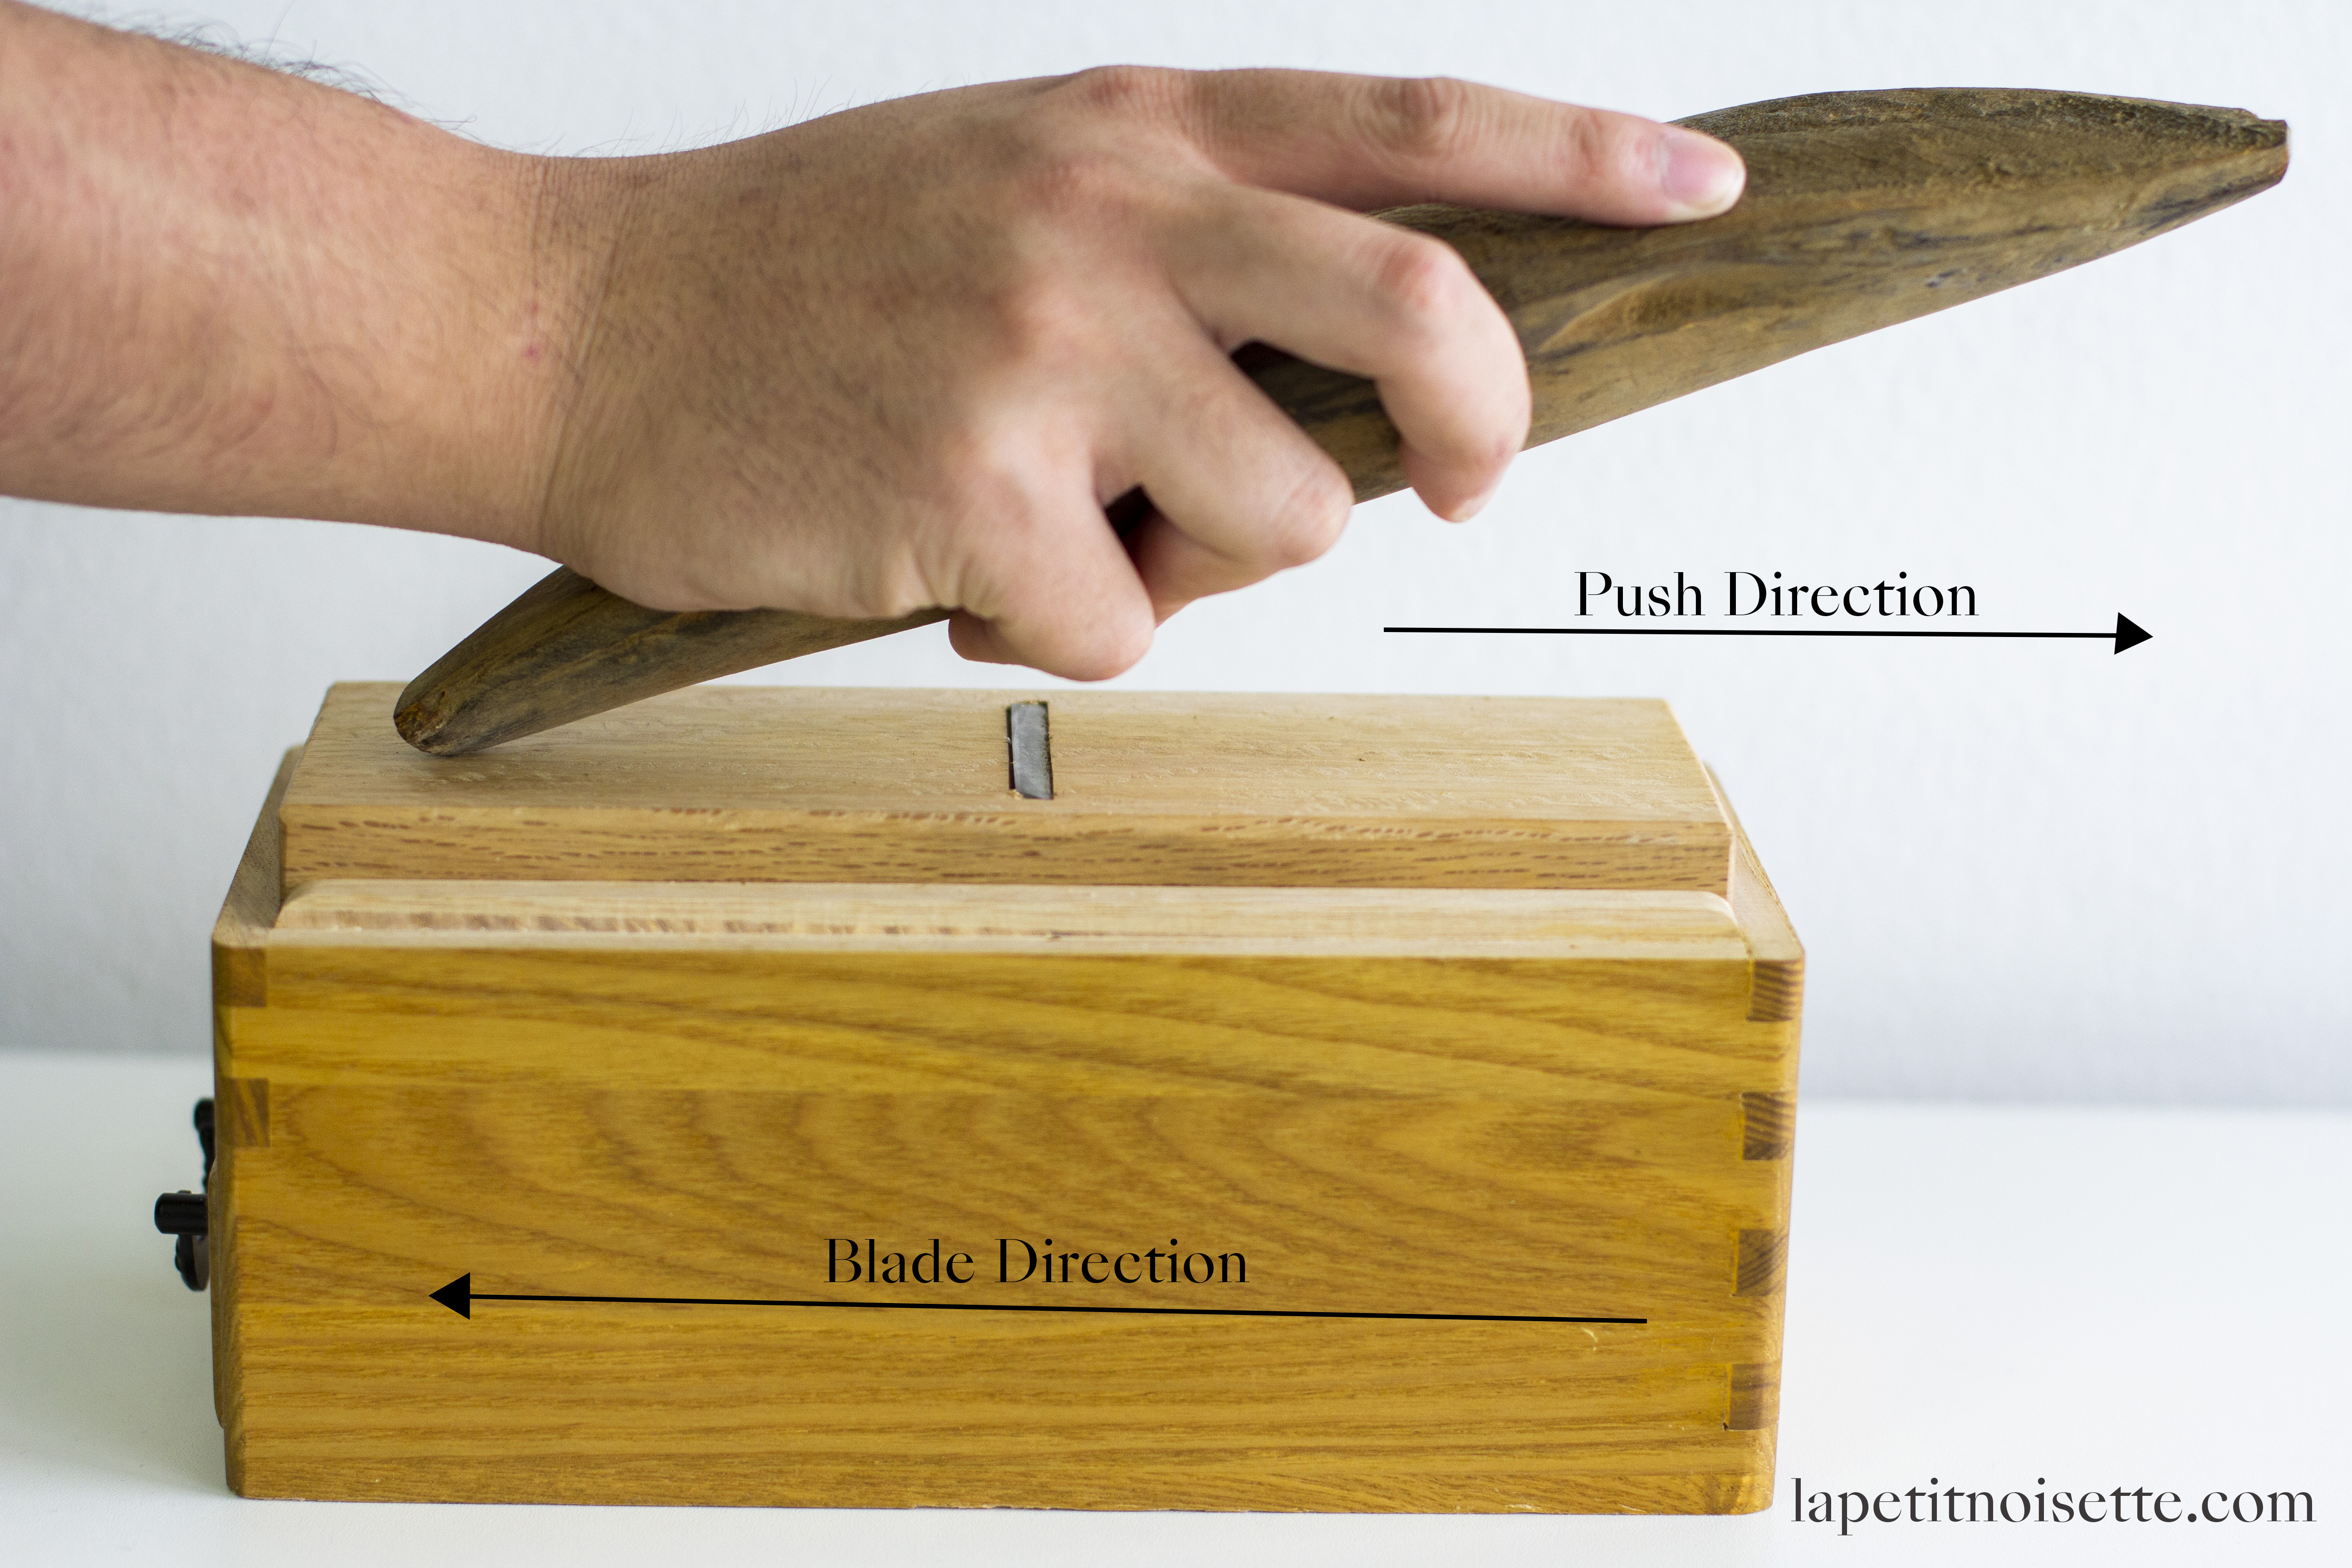  The katsuobushi should be held at a 45° angle to the blade when shaving and pushing from the tail to head direction.